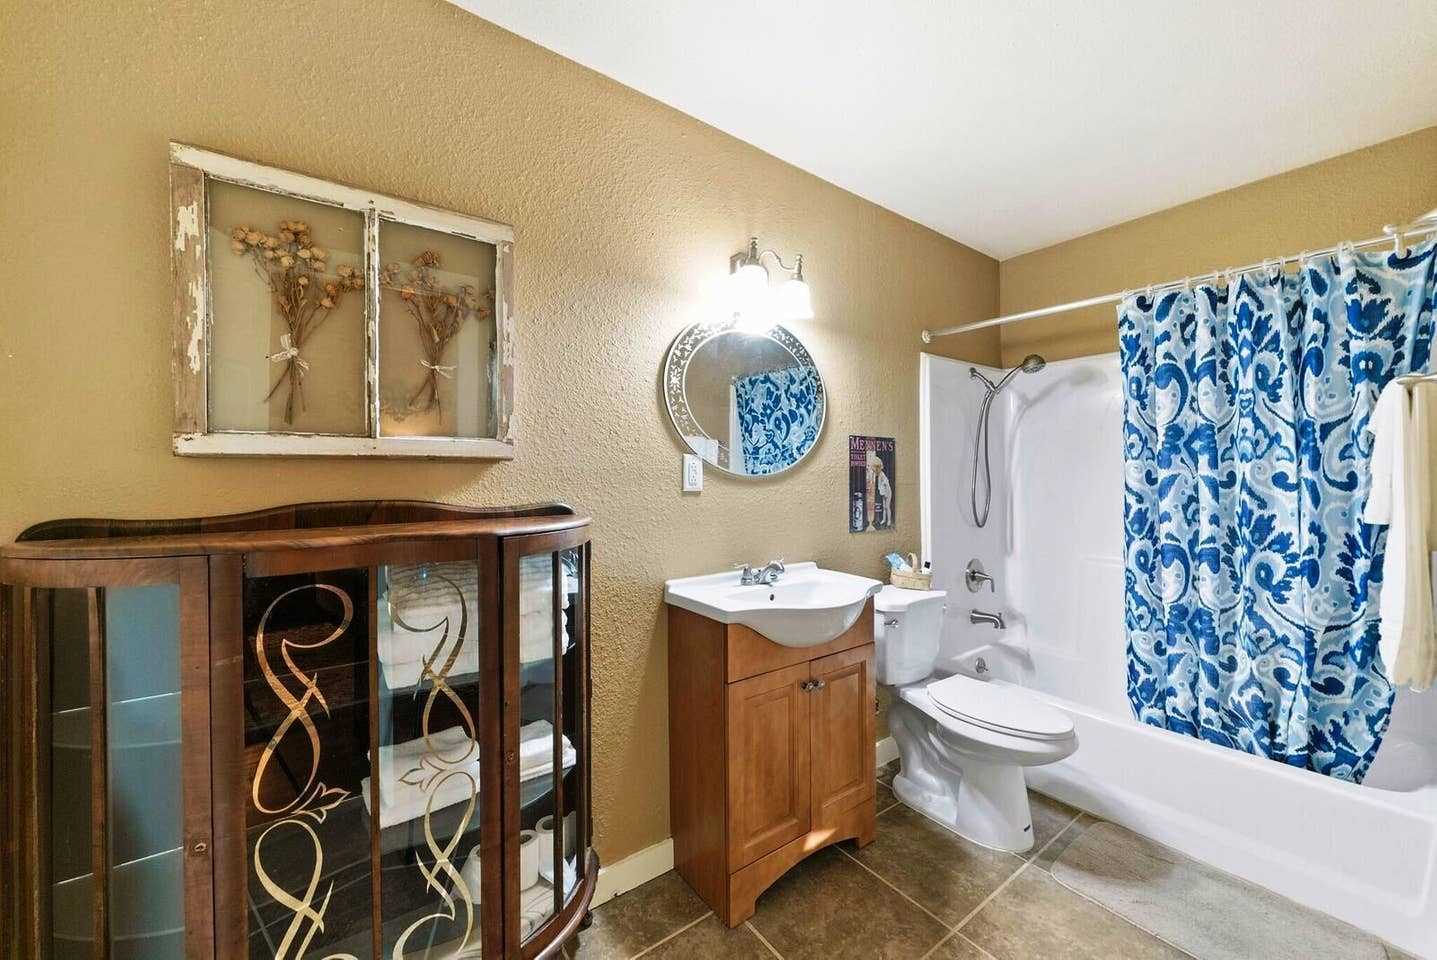                                                 The full bath here features a tub and shower combo, and soft and clean bed and bath linens are provided for your stay.